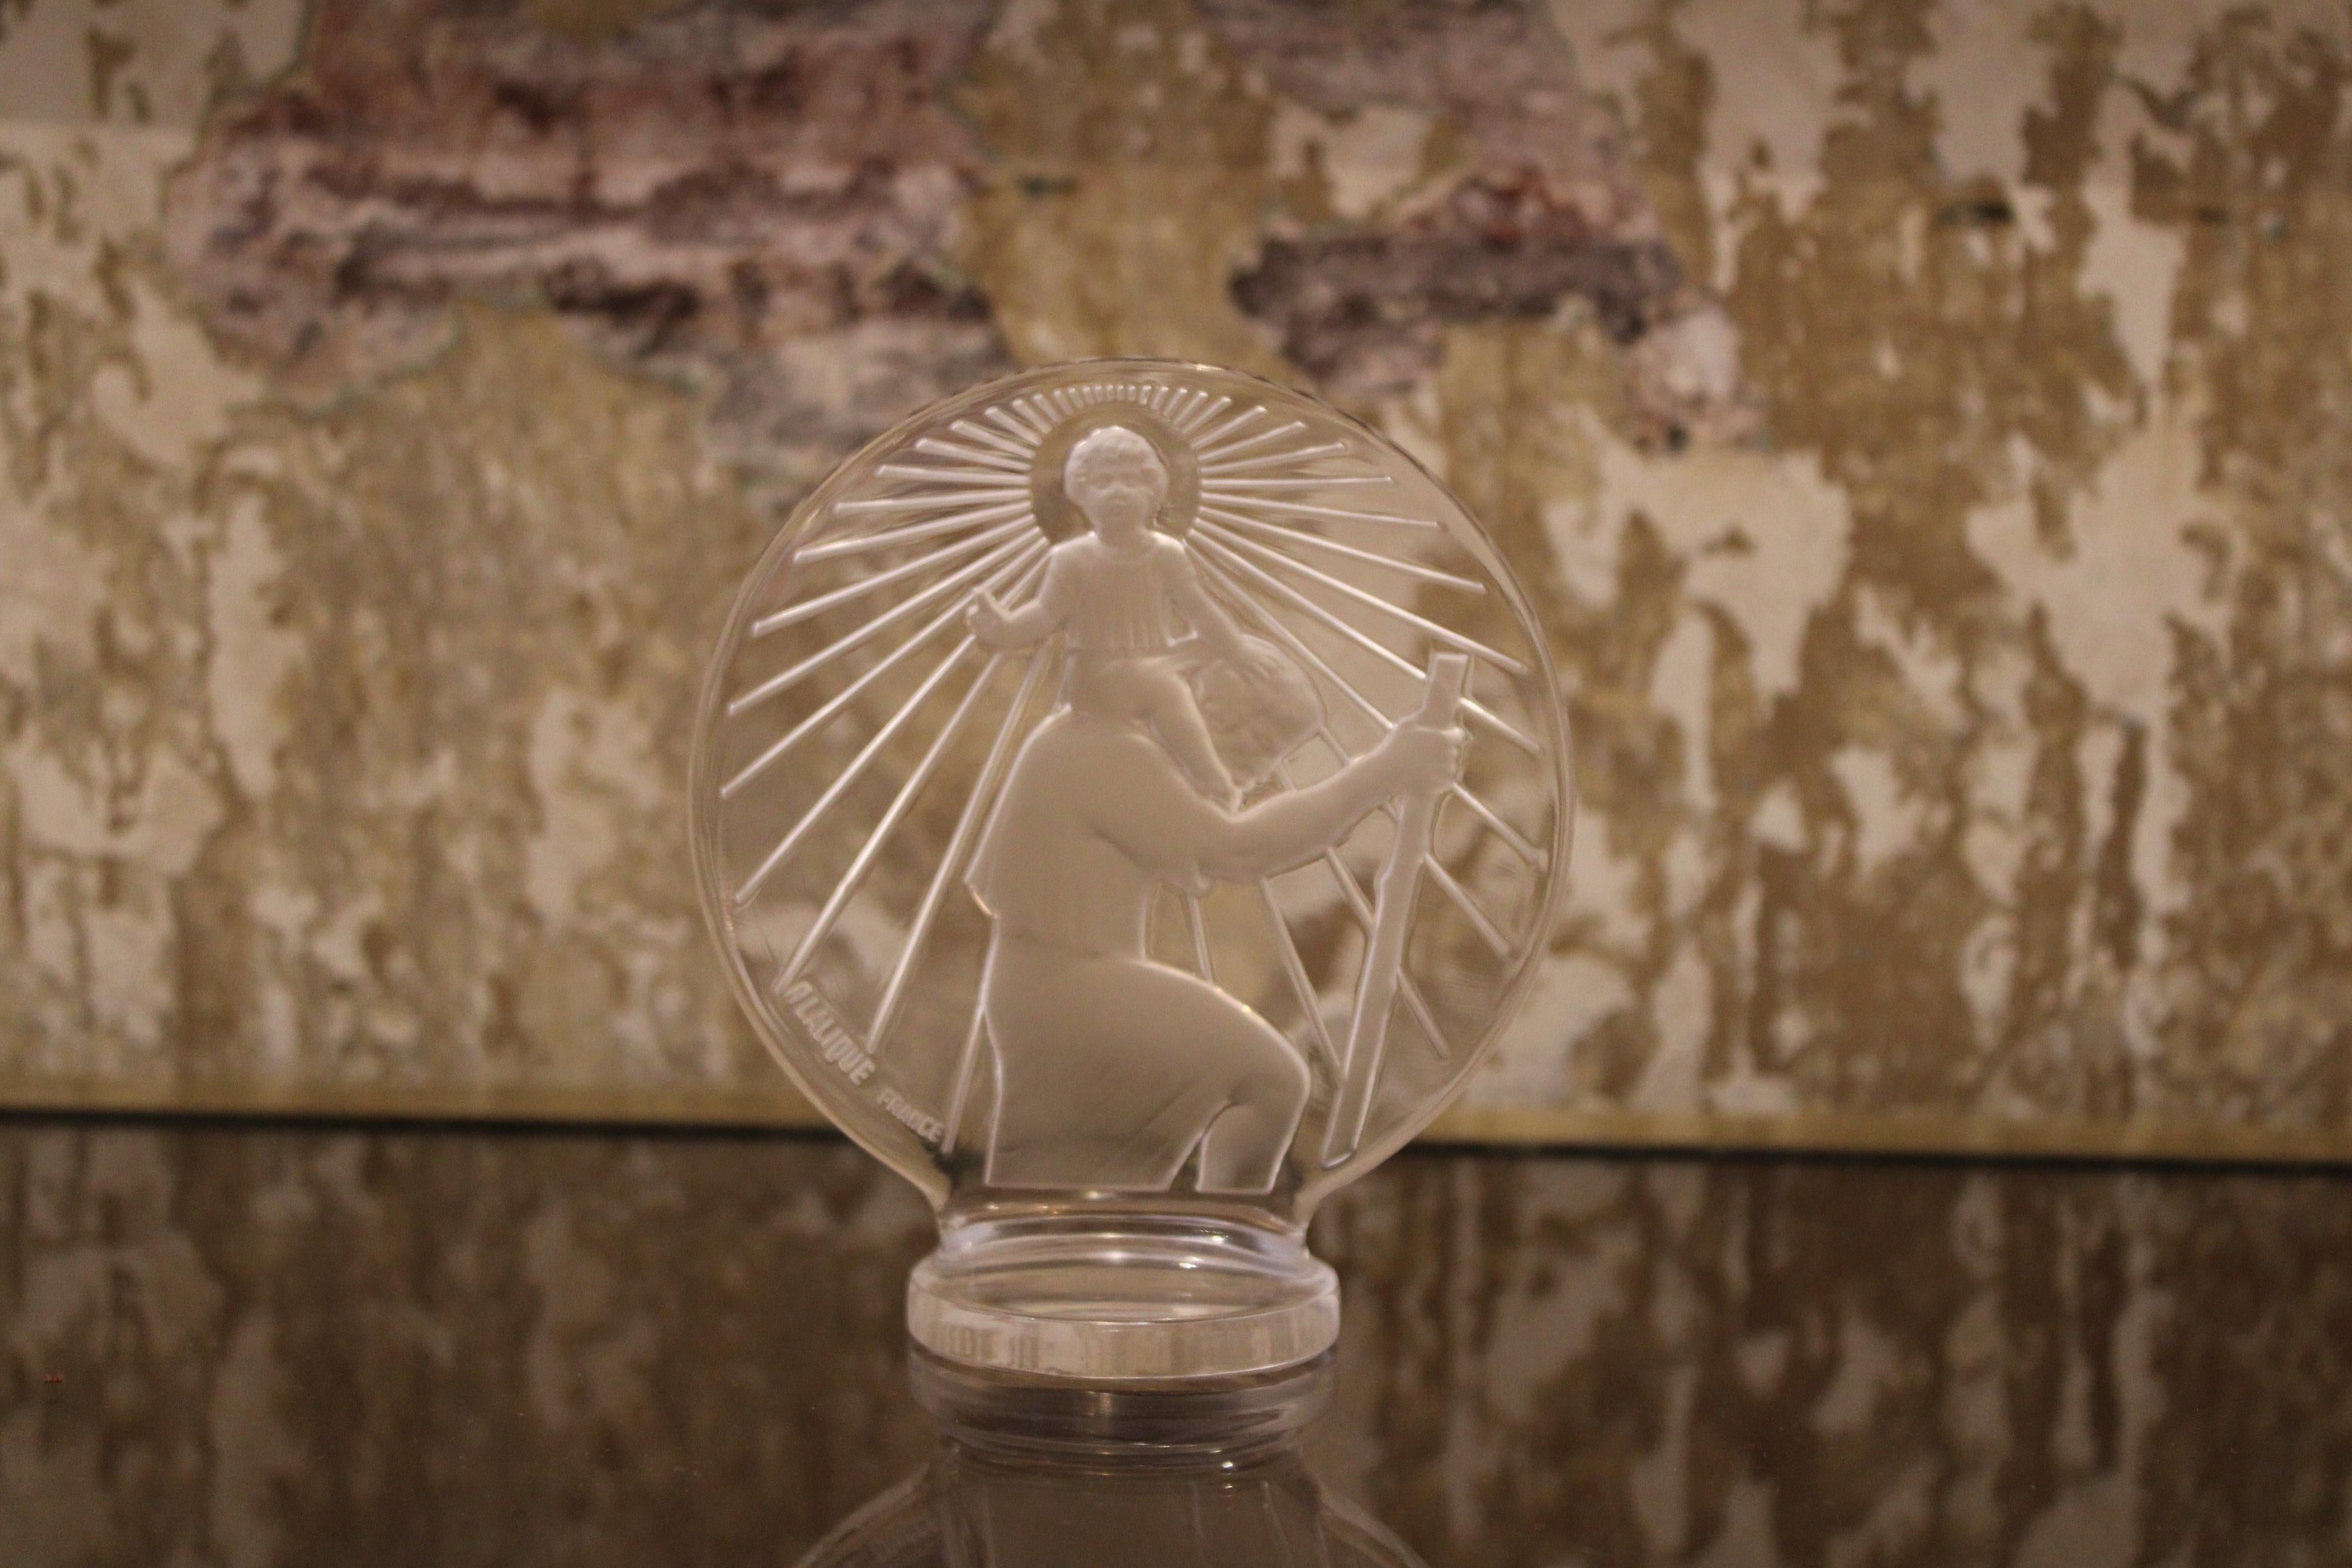 Sculpture by René Lalique in sculpted glass
Signed 